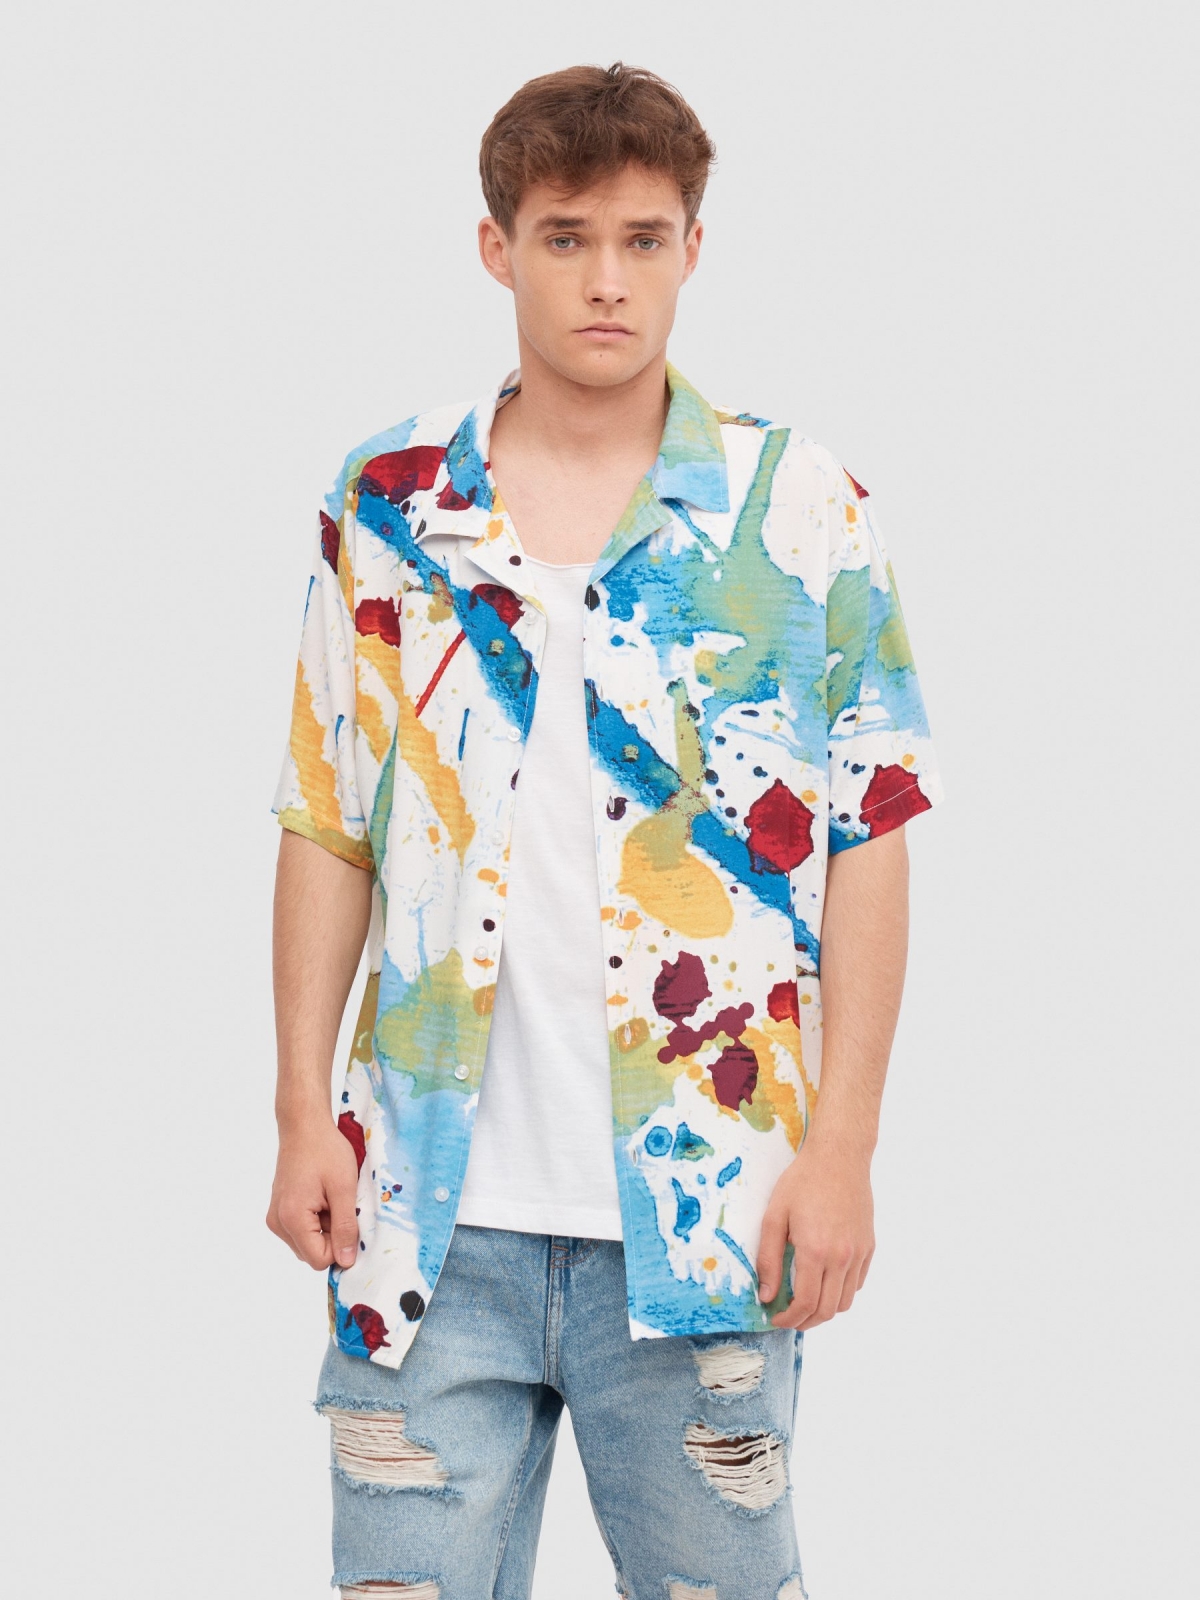 Watercolour shirt white middle front view